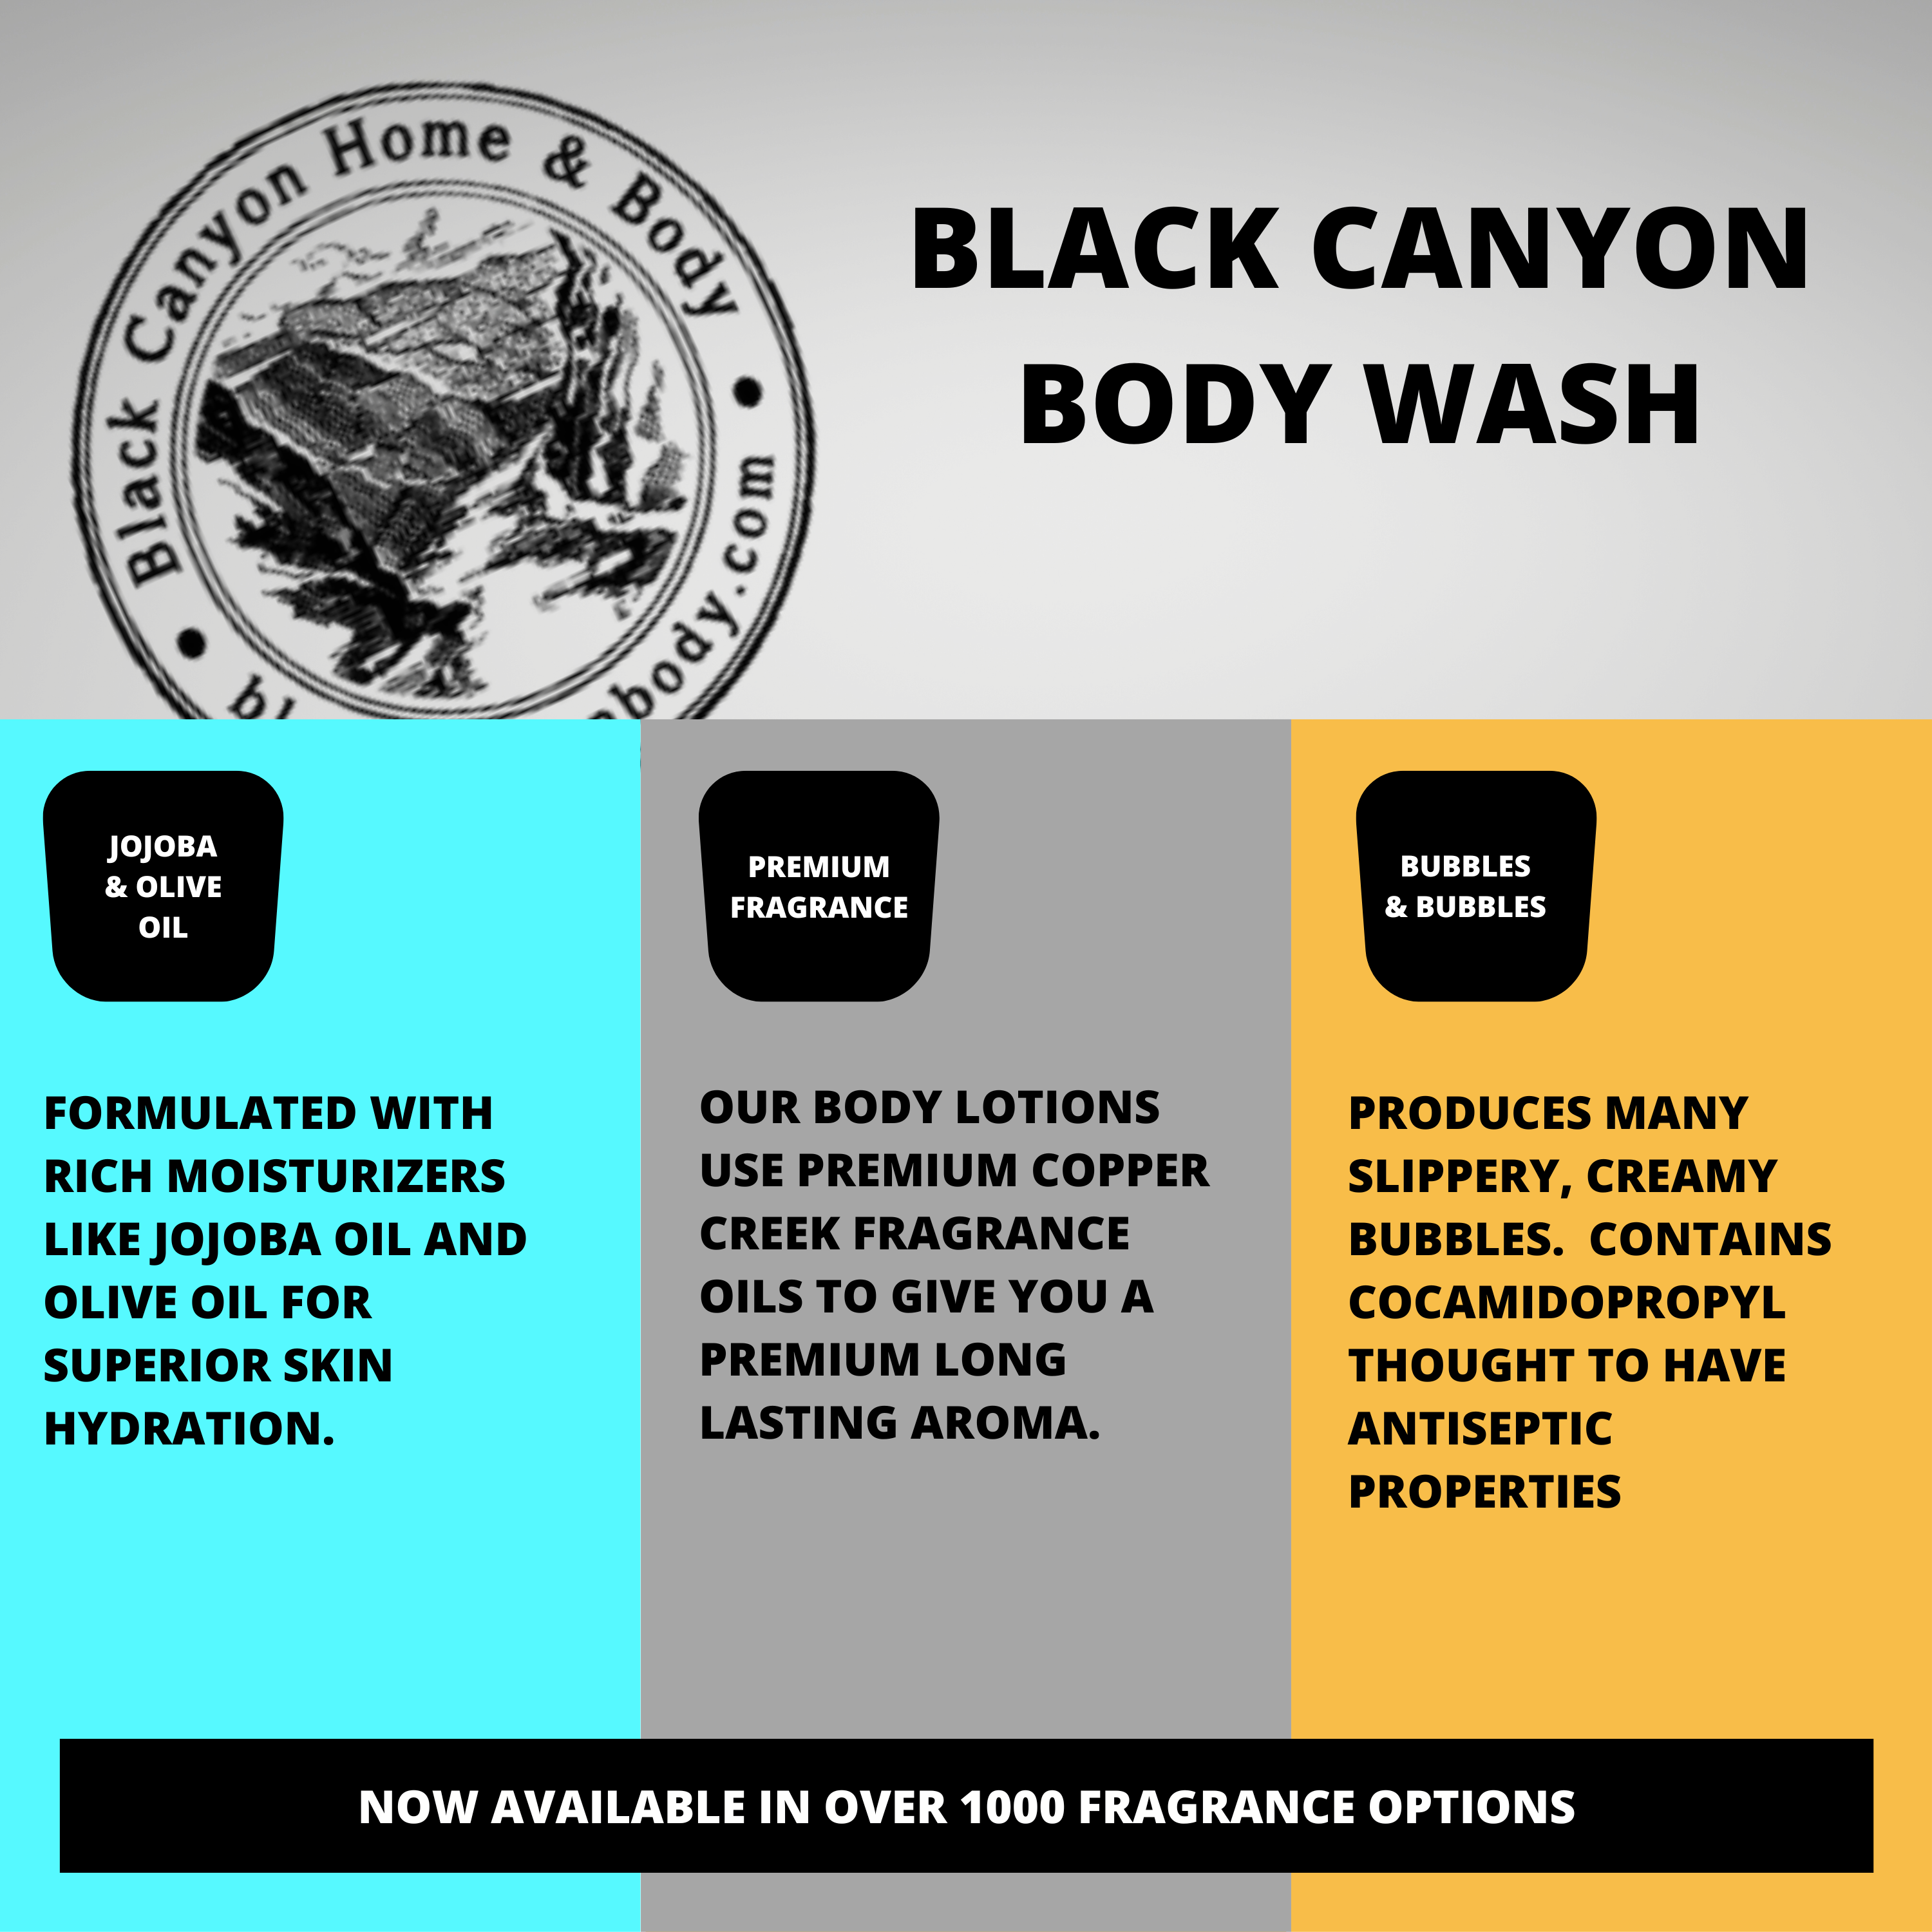 Black Canyon Black Currant & Cognac Scented Luxury Body Wash